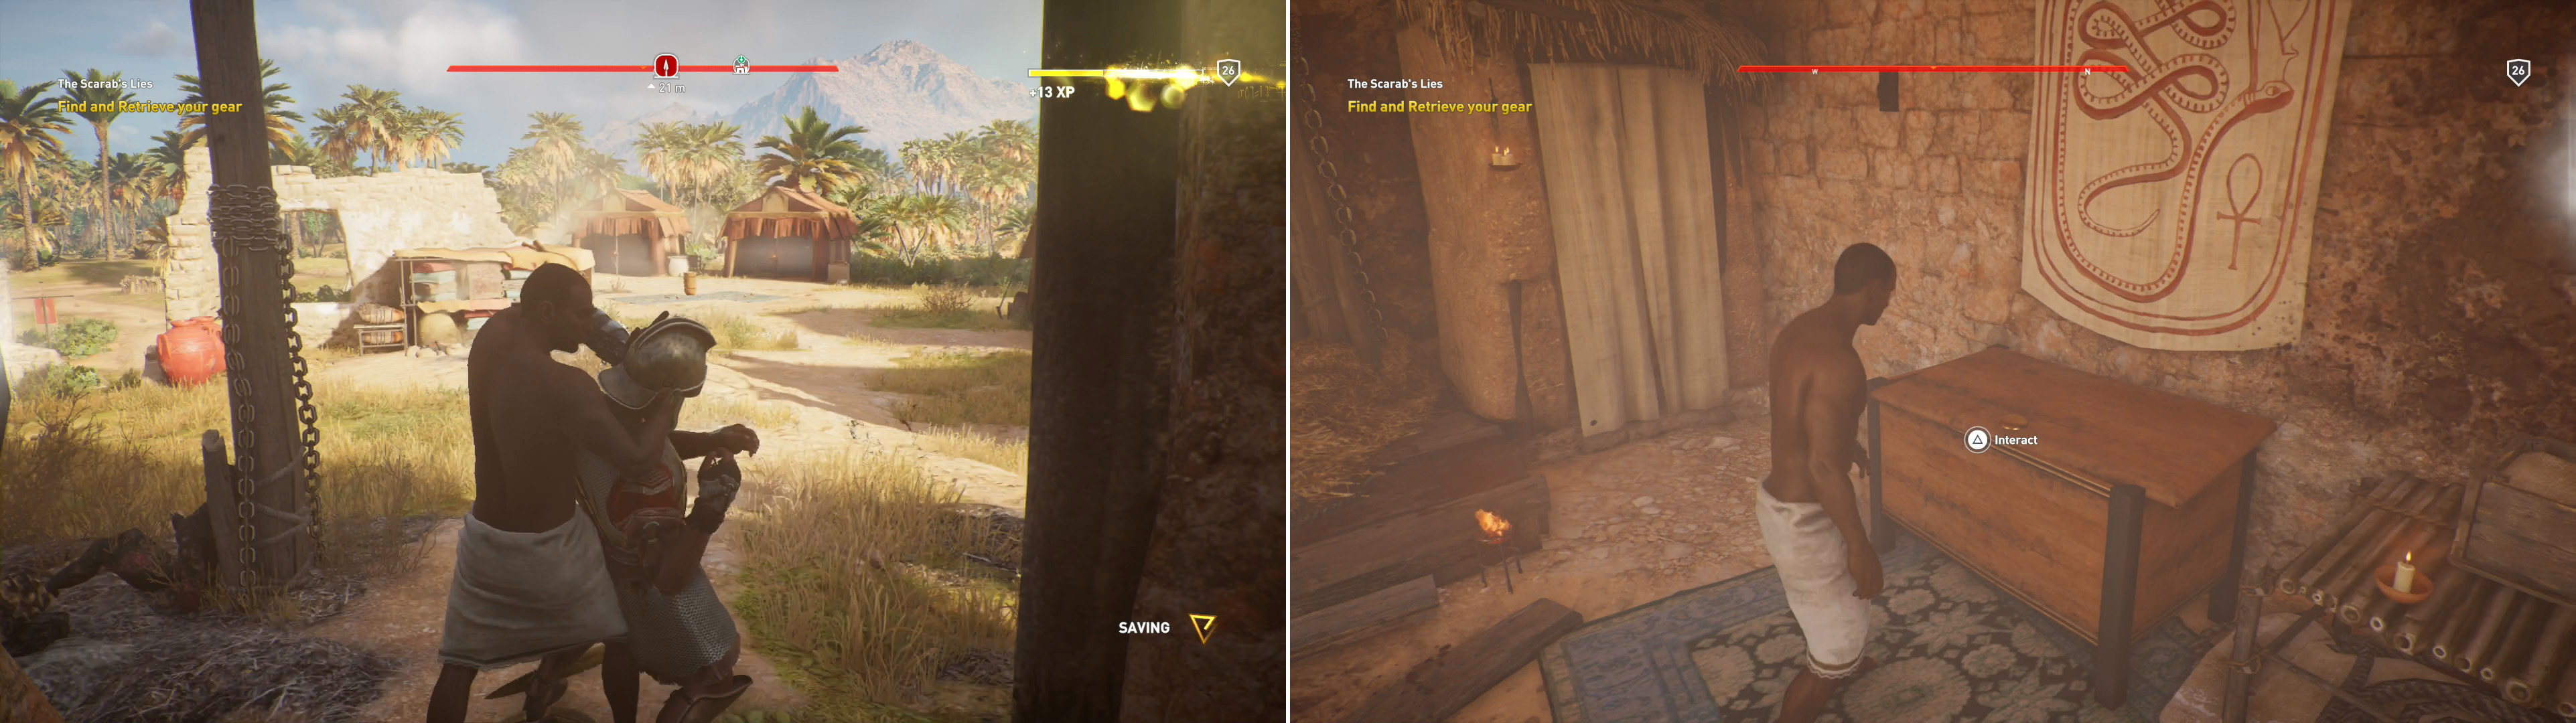 The Scarab left Bayek with only one weapon, his hidden blade - one weapon too many, as it turns out (left). Be that as it may, versatility won’t hurt. Kill the guards and recover your gear (right).